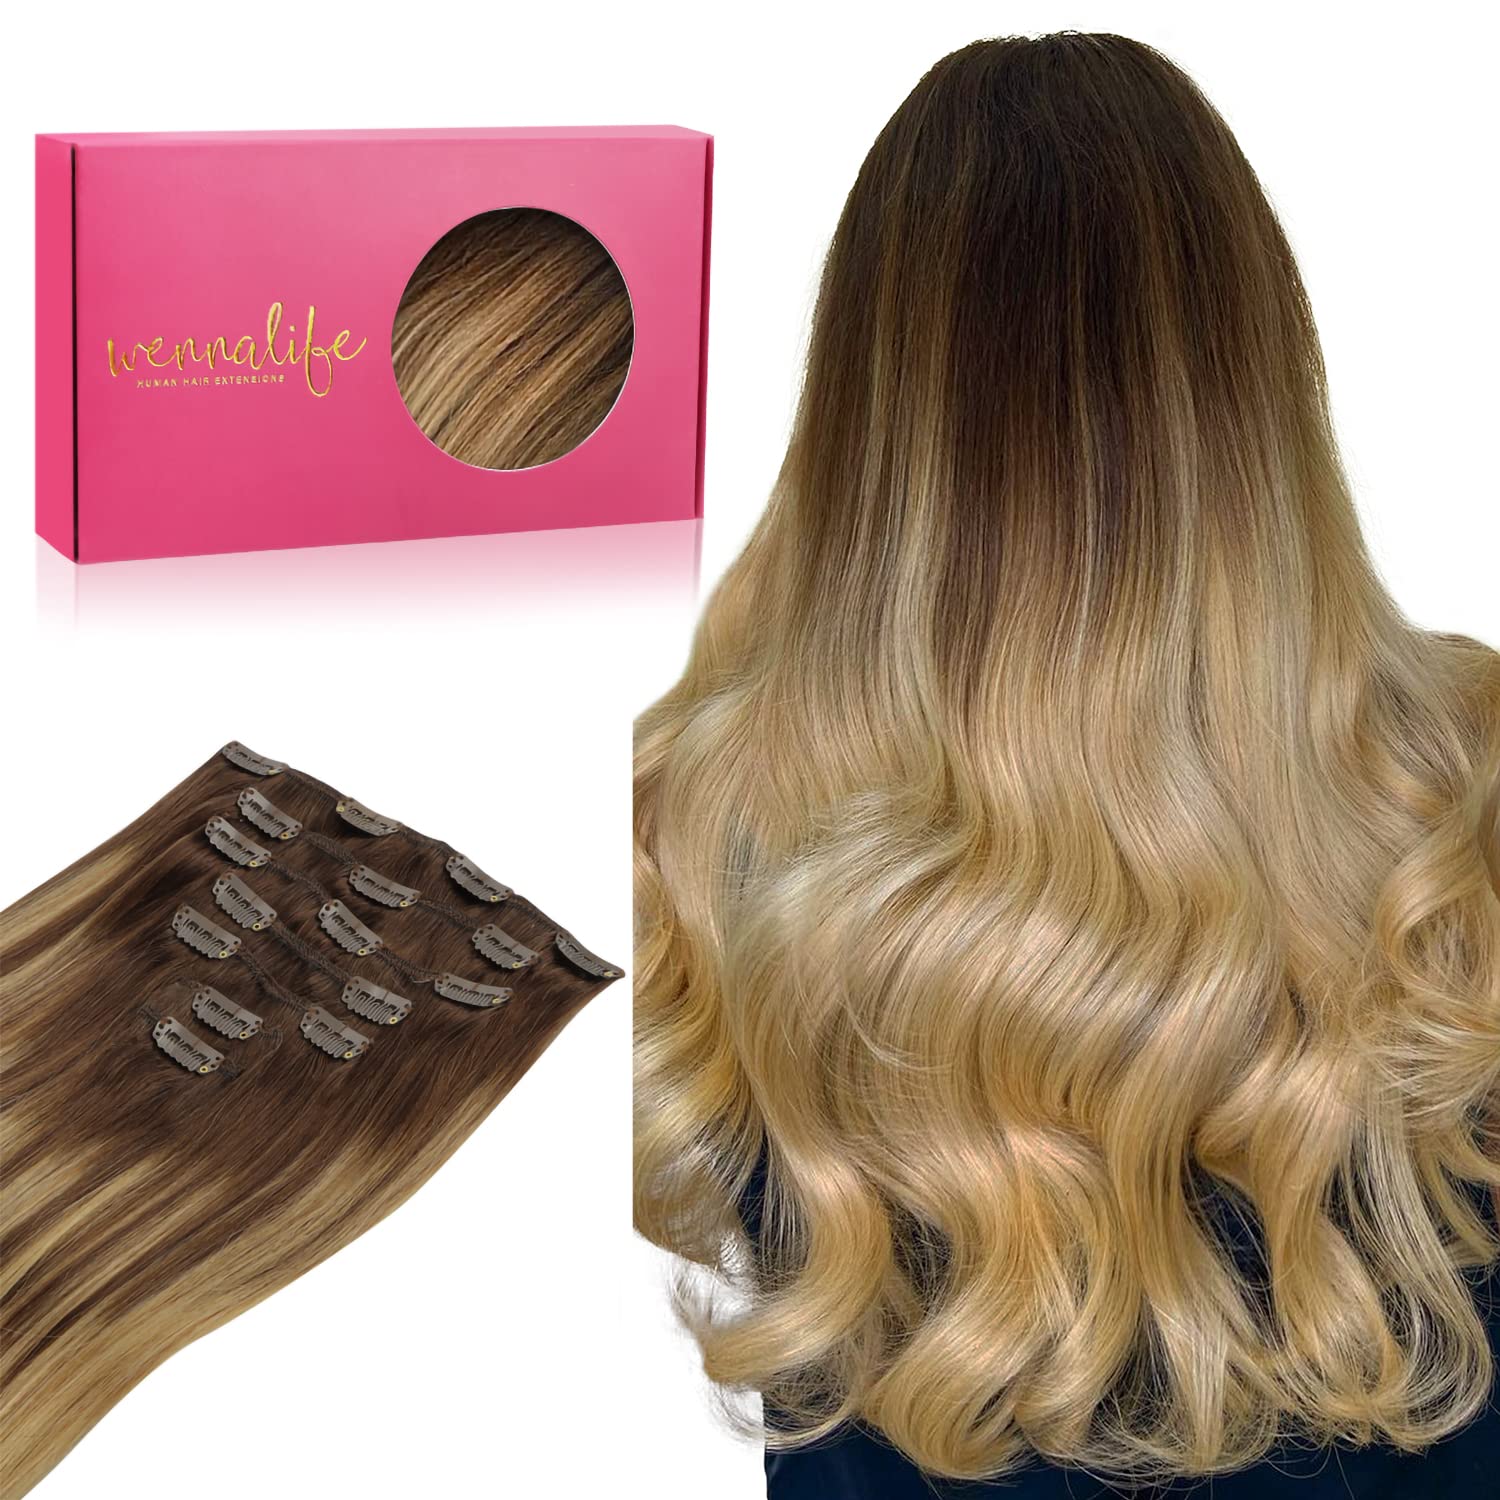 Wennalife Clip In Hair Extensions, 22 Inch 120G 7Pcs Balayage Chocolate Brown To Dirty Blonde Hair Extensions Clip In Human Hair